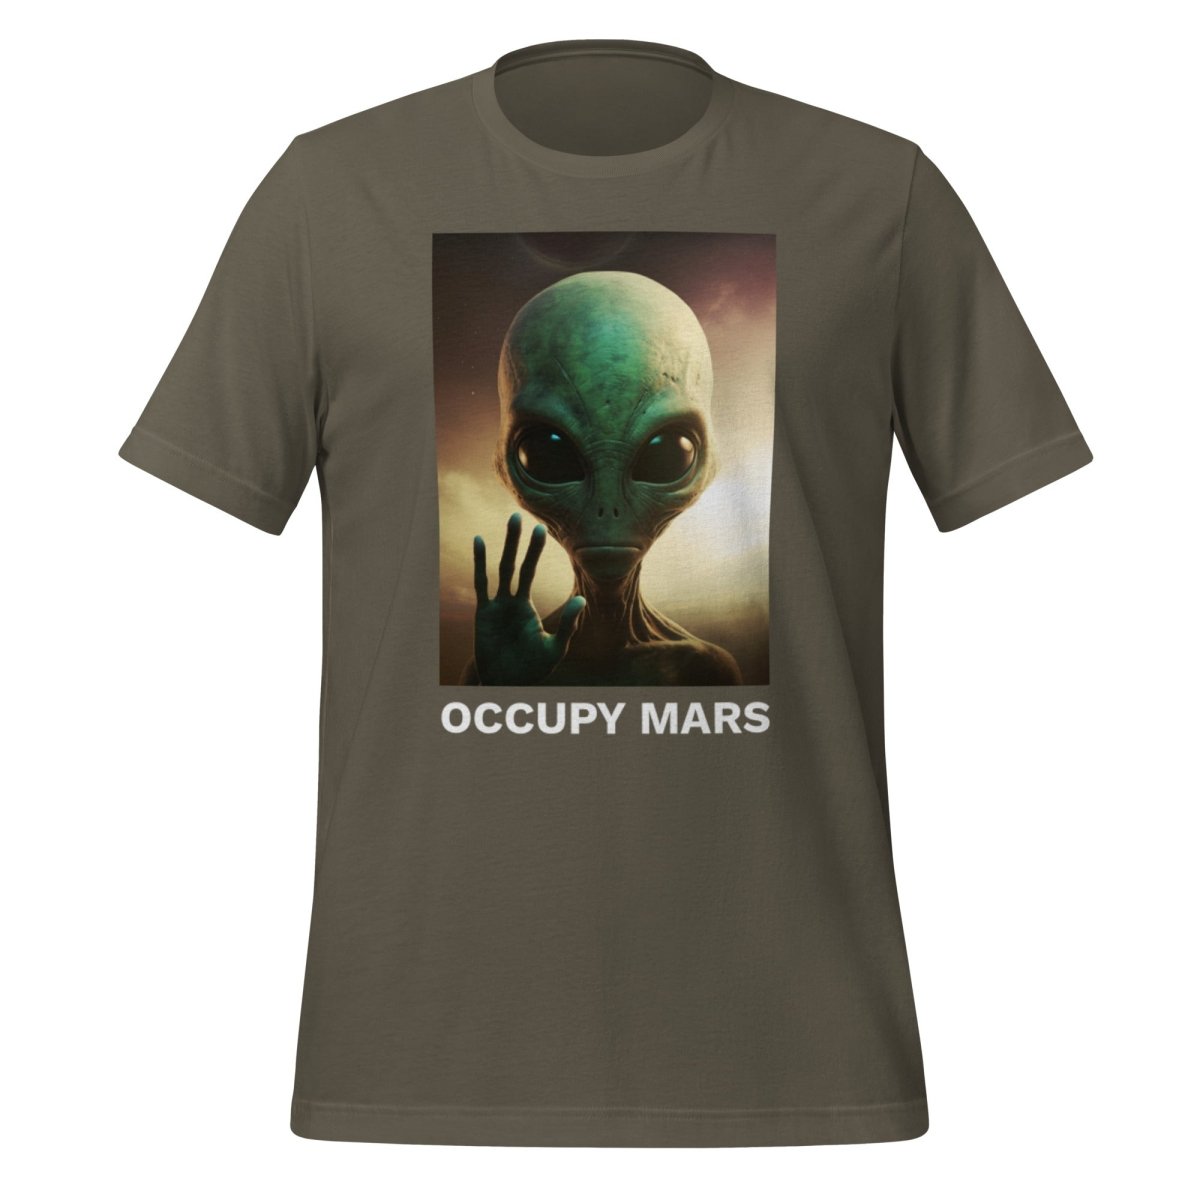 Occupy Mars T - Shirt 2 (unisex) - Army - AI Store